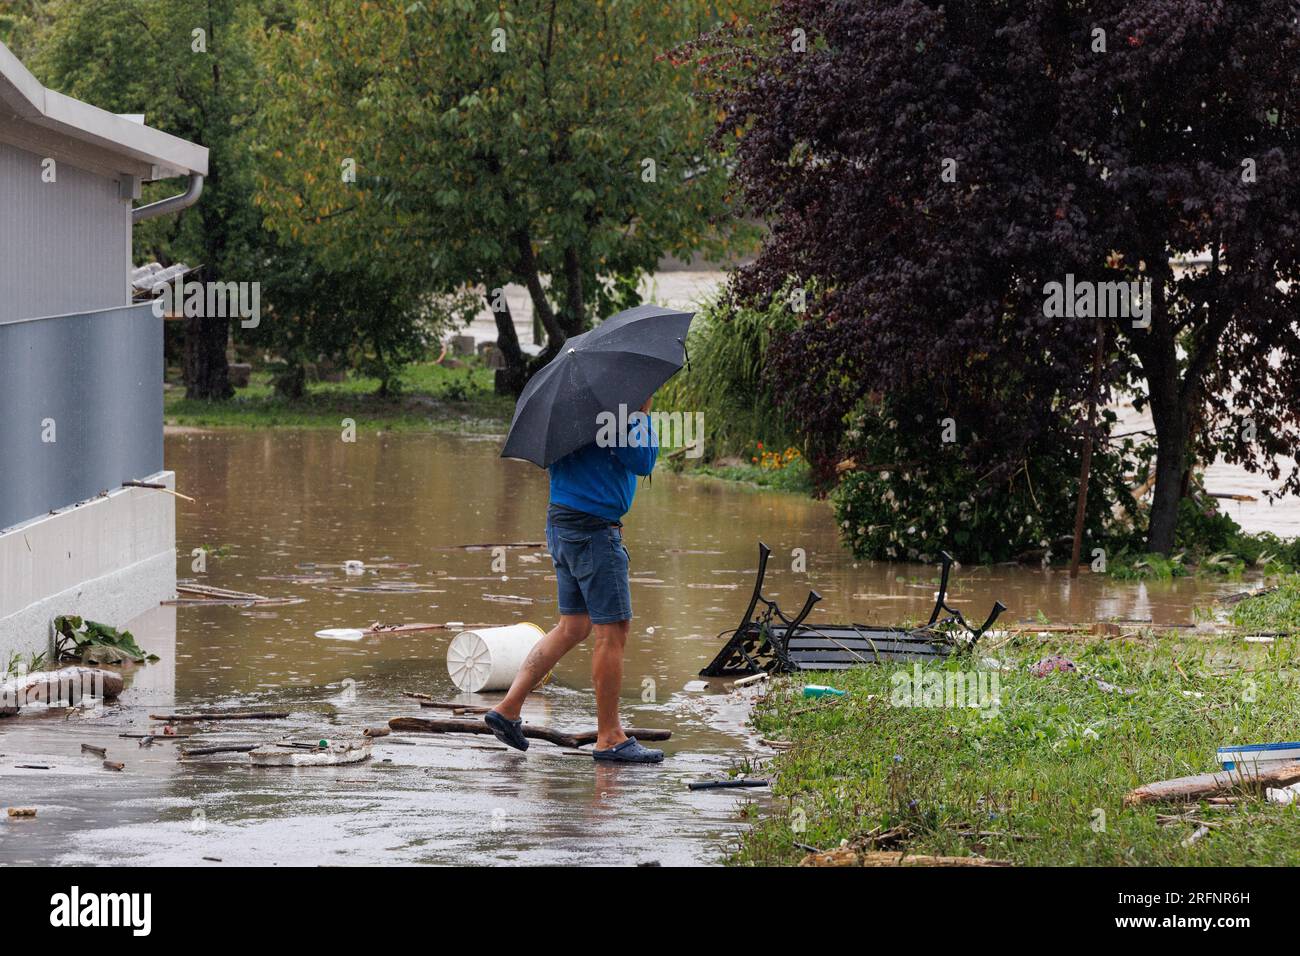 A man walks past a flooded driveway after a flood in Medvode. Heavy continuous torrential rain and storms have caused major flooding all throughout Slovenia in the first part of the forecasted severe weather event. Roads and railroads were closed, several areas had no electricity or drinking water, and fatalities were reported. Stock Photo